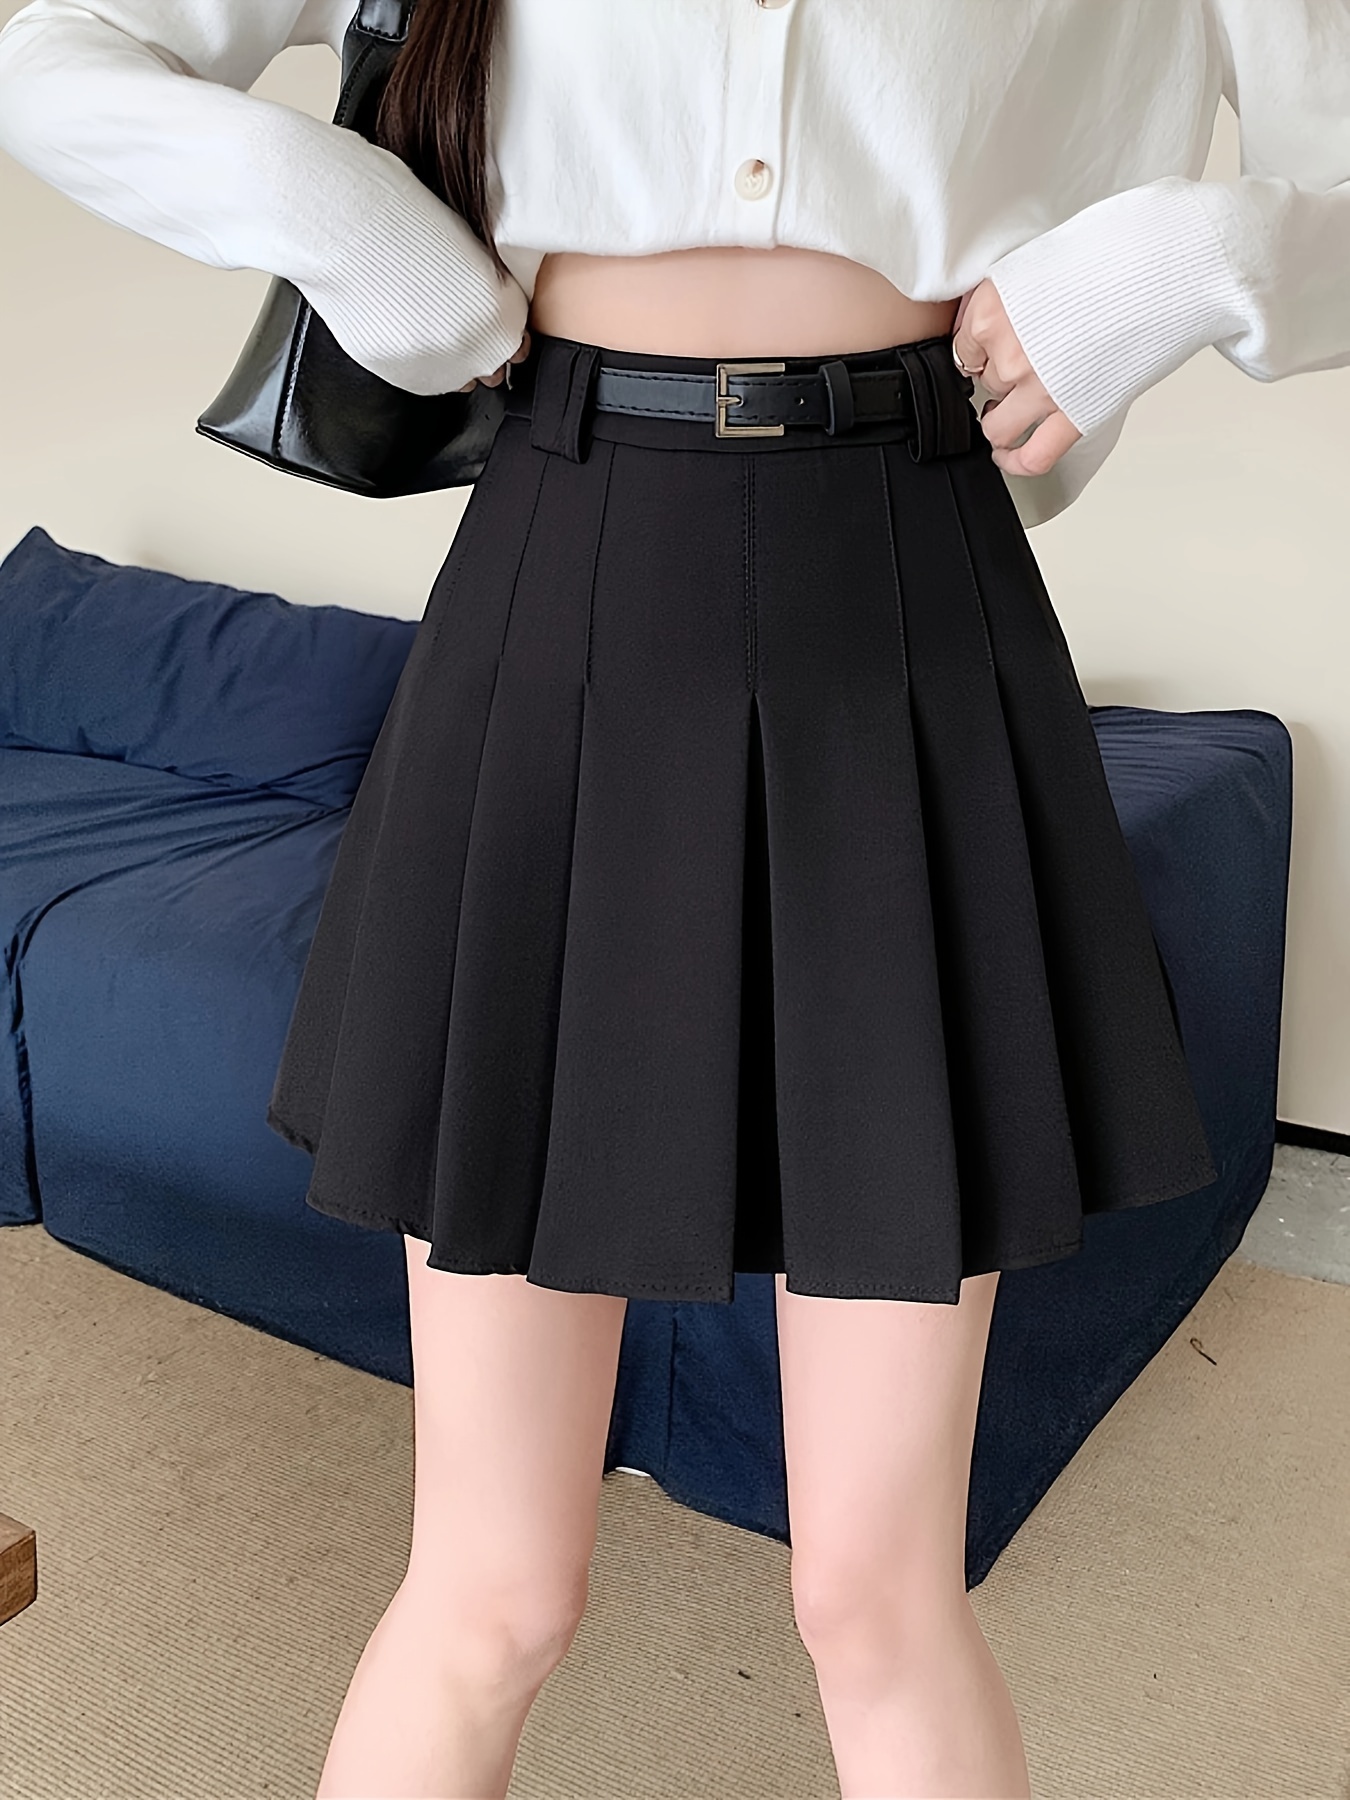 5 Ways to Style a Black Pleated Skirt - Stylish Life for Moms-seedfund.vn